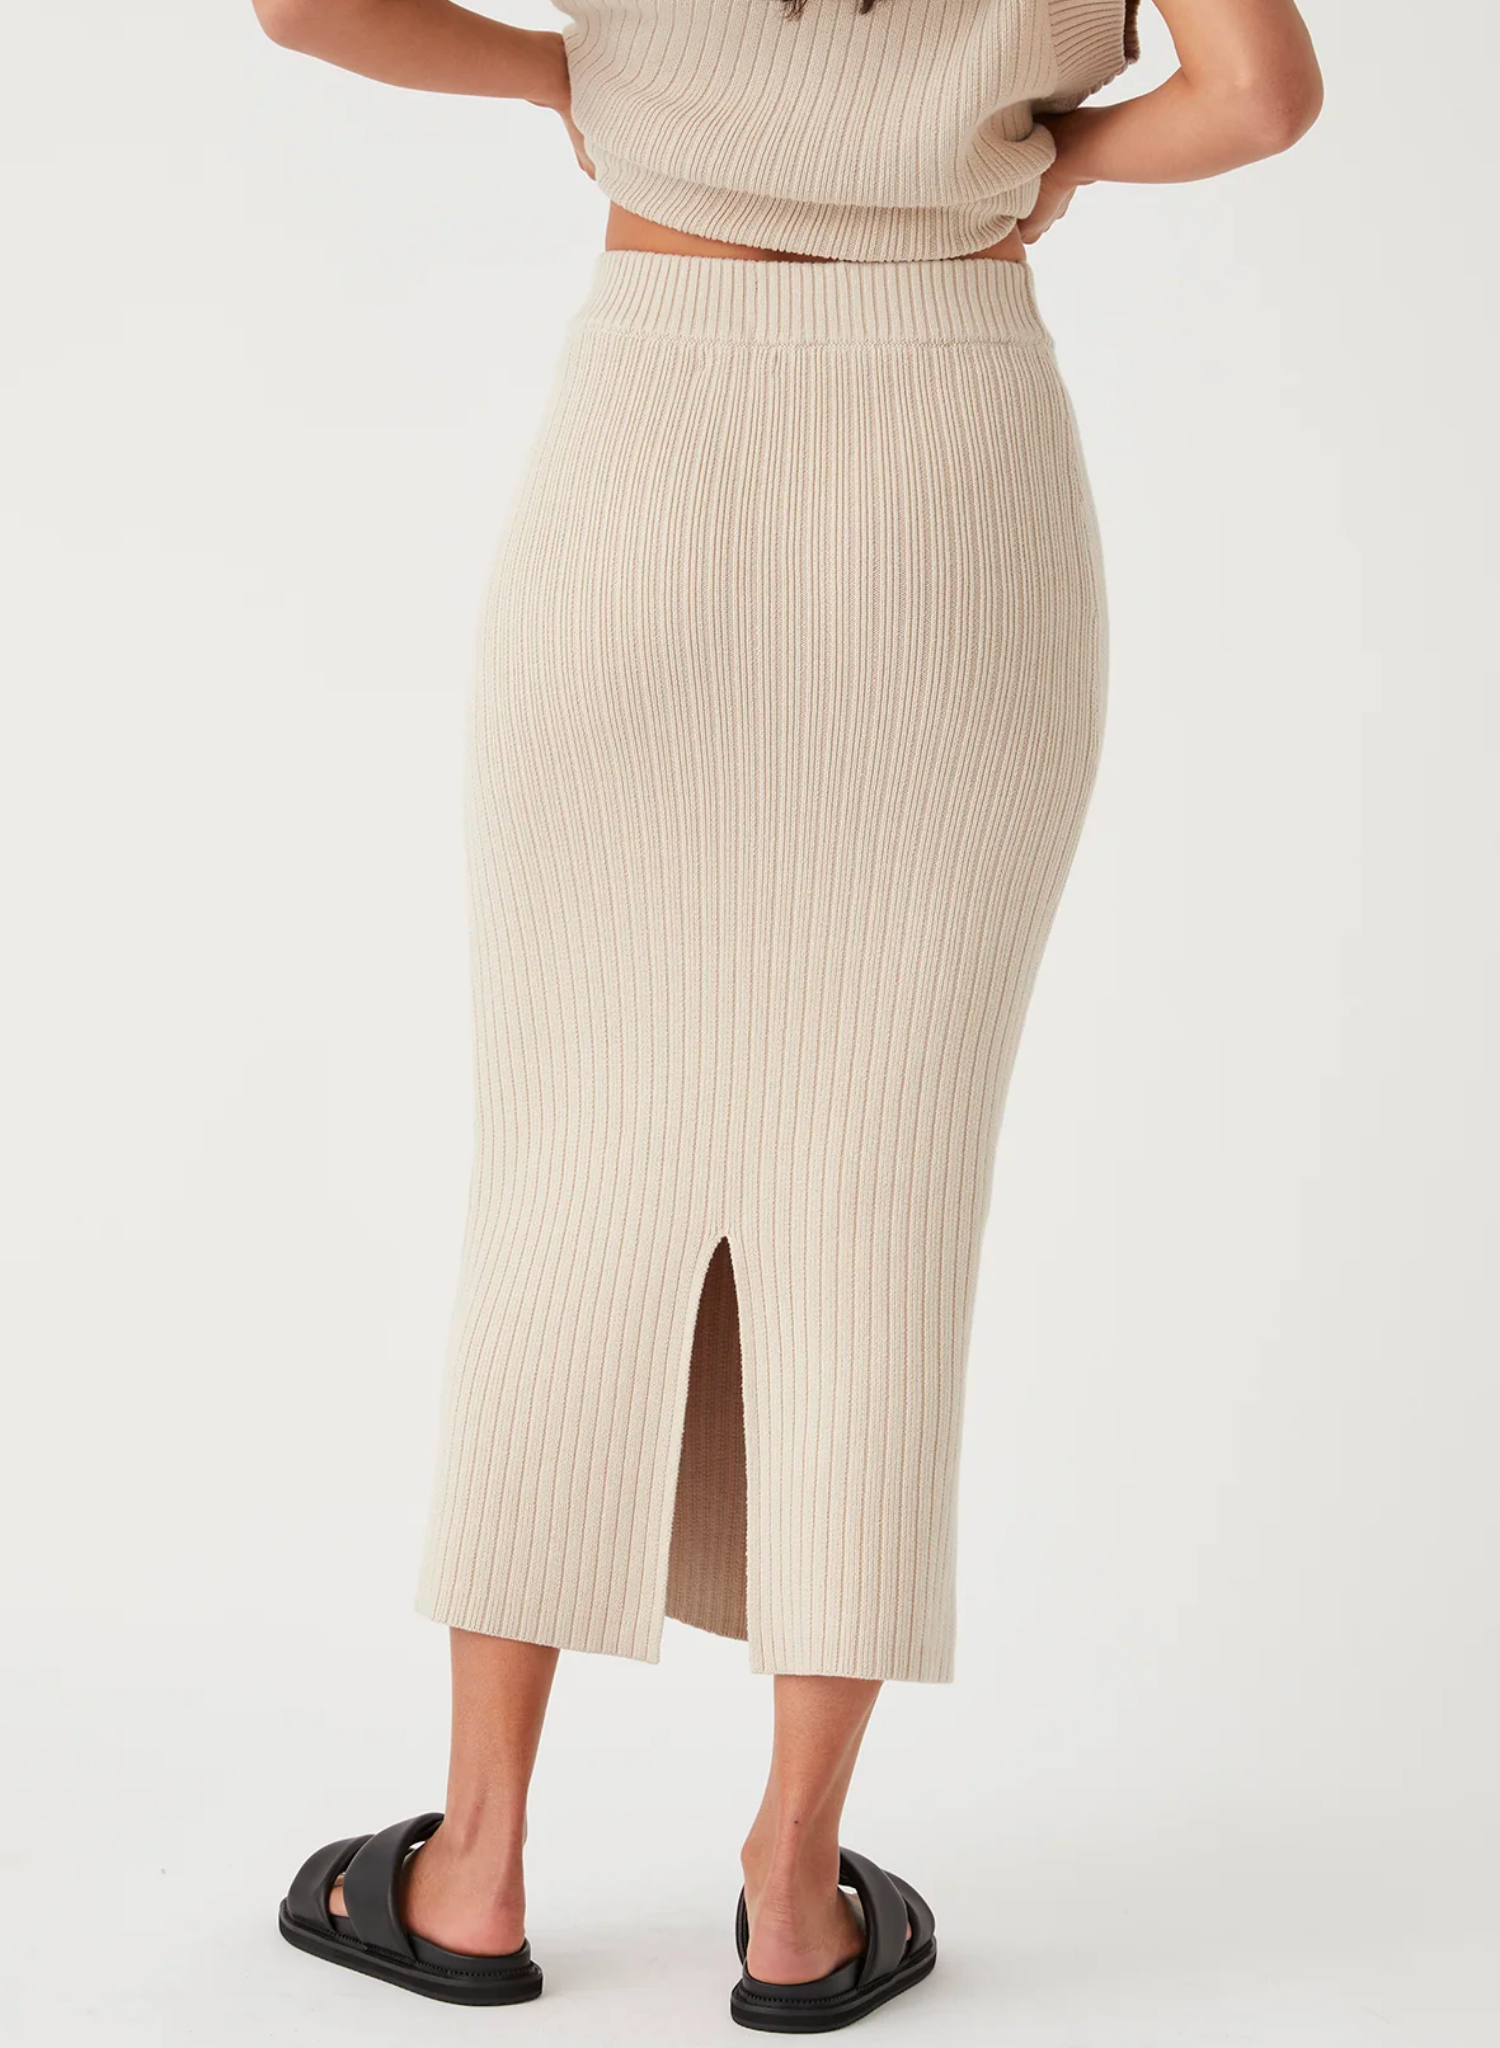 Ribbed texture. Midi length Skirt. Ethically produced Free of harmful chemicals: OEKO-TEX Standard 100 95% GOTS Certified Organic Cotton 5% Elastane